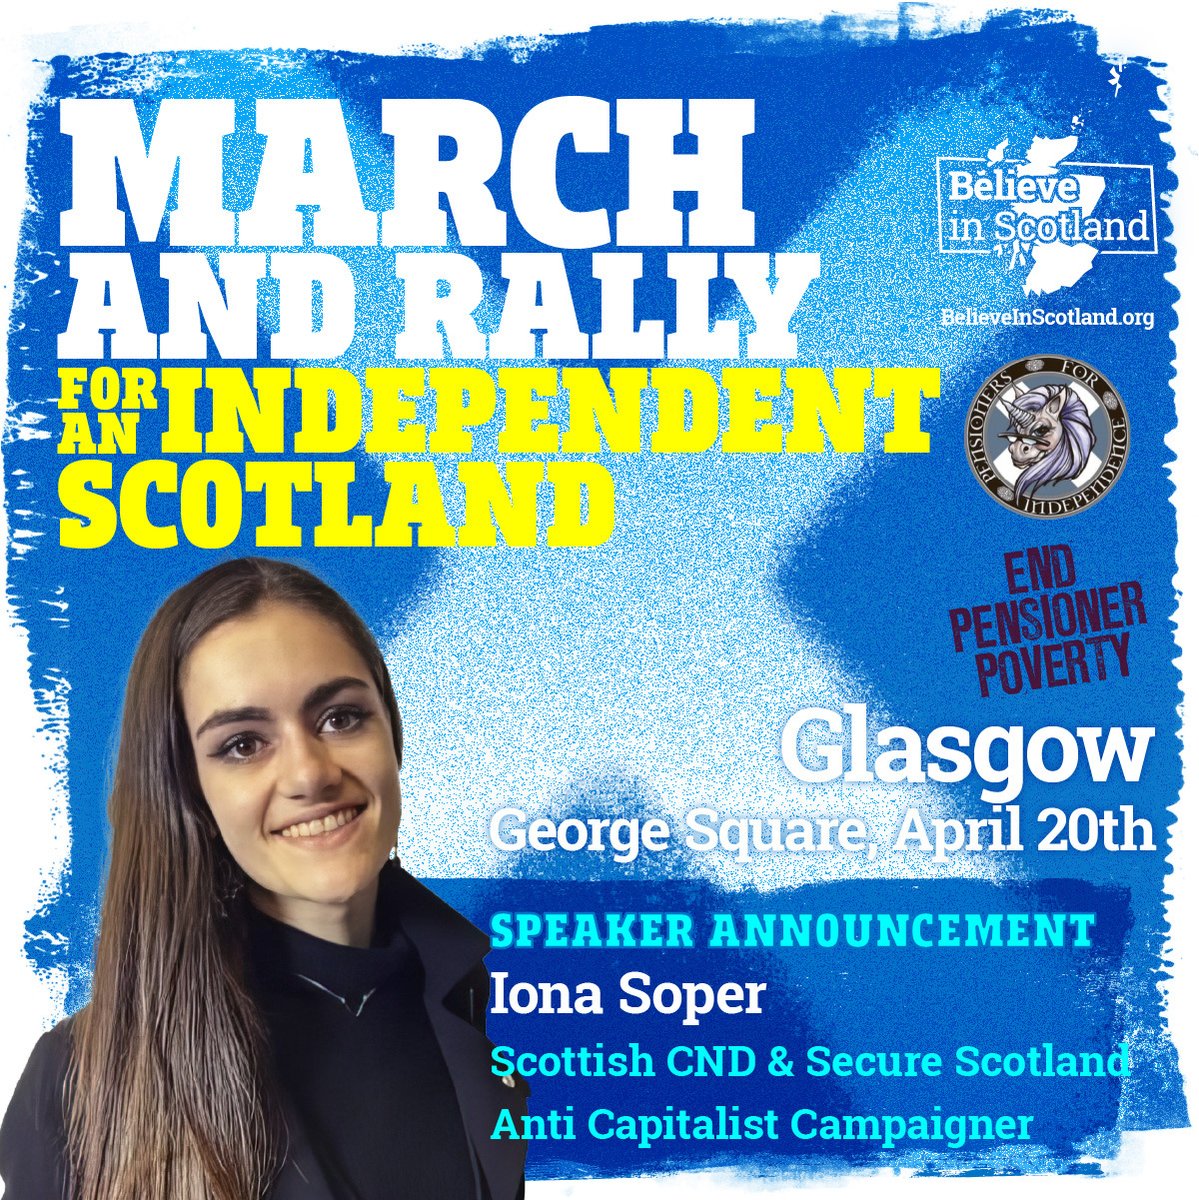 📣 Speaker announcement: Scottish CND & Secure Scotland Anti Capitalist Campaigner, Iona Soper. 🏴󠁧󠁢󠁳󠁣󠁴󠁿 Let’s march together to unleash Scotland's true potential! ✍️ Sign up here to make sure you don’t miss an update: bit.ly/3uj64Mi